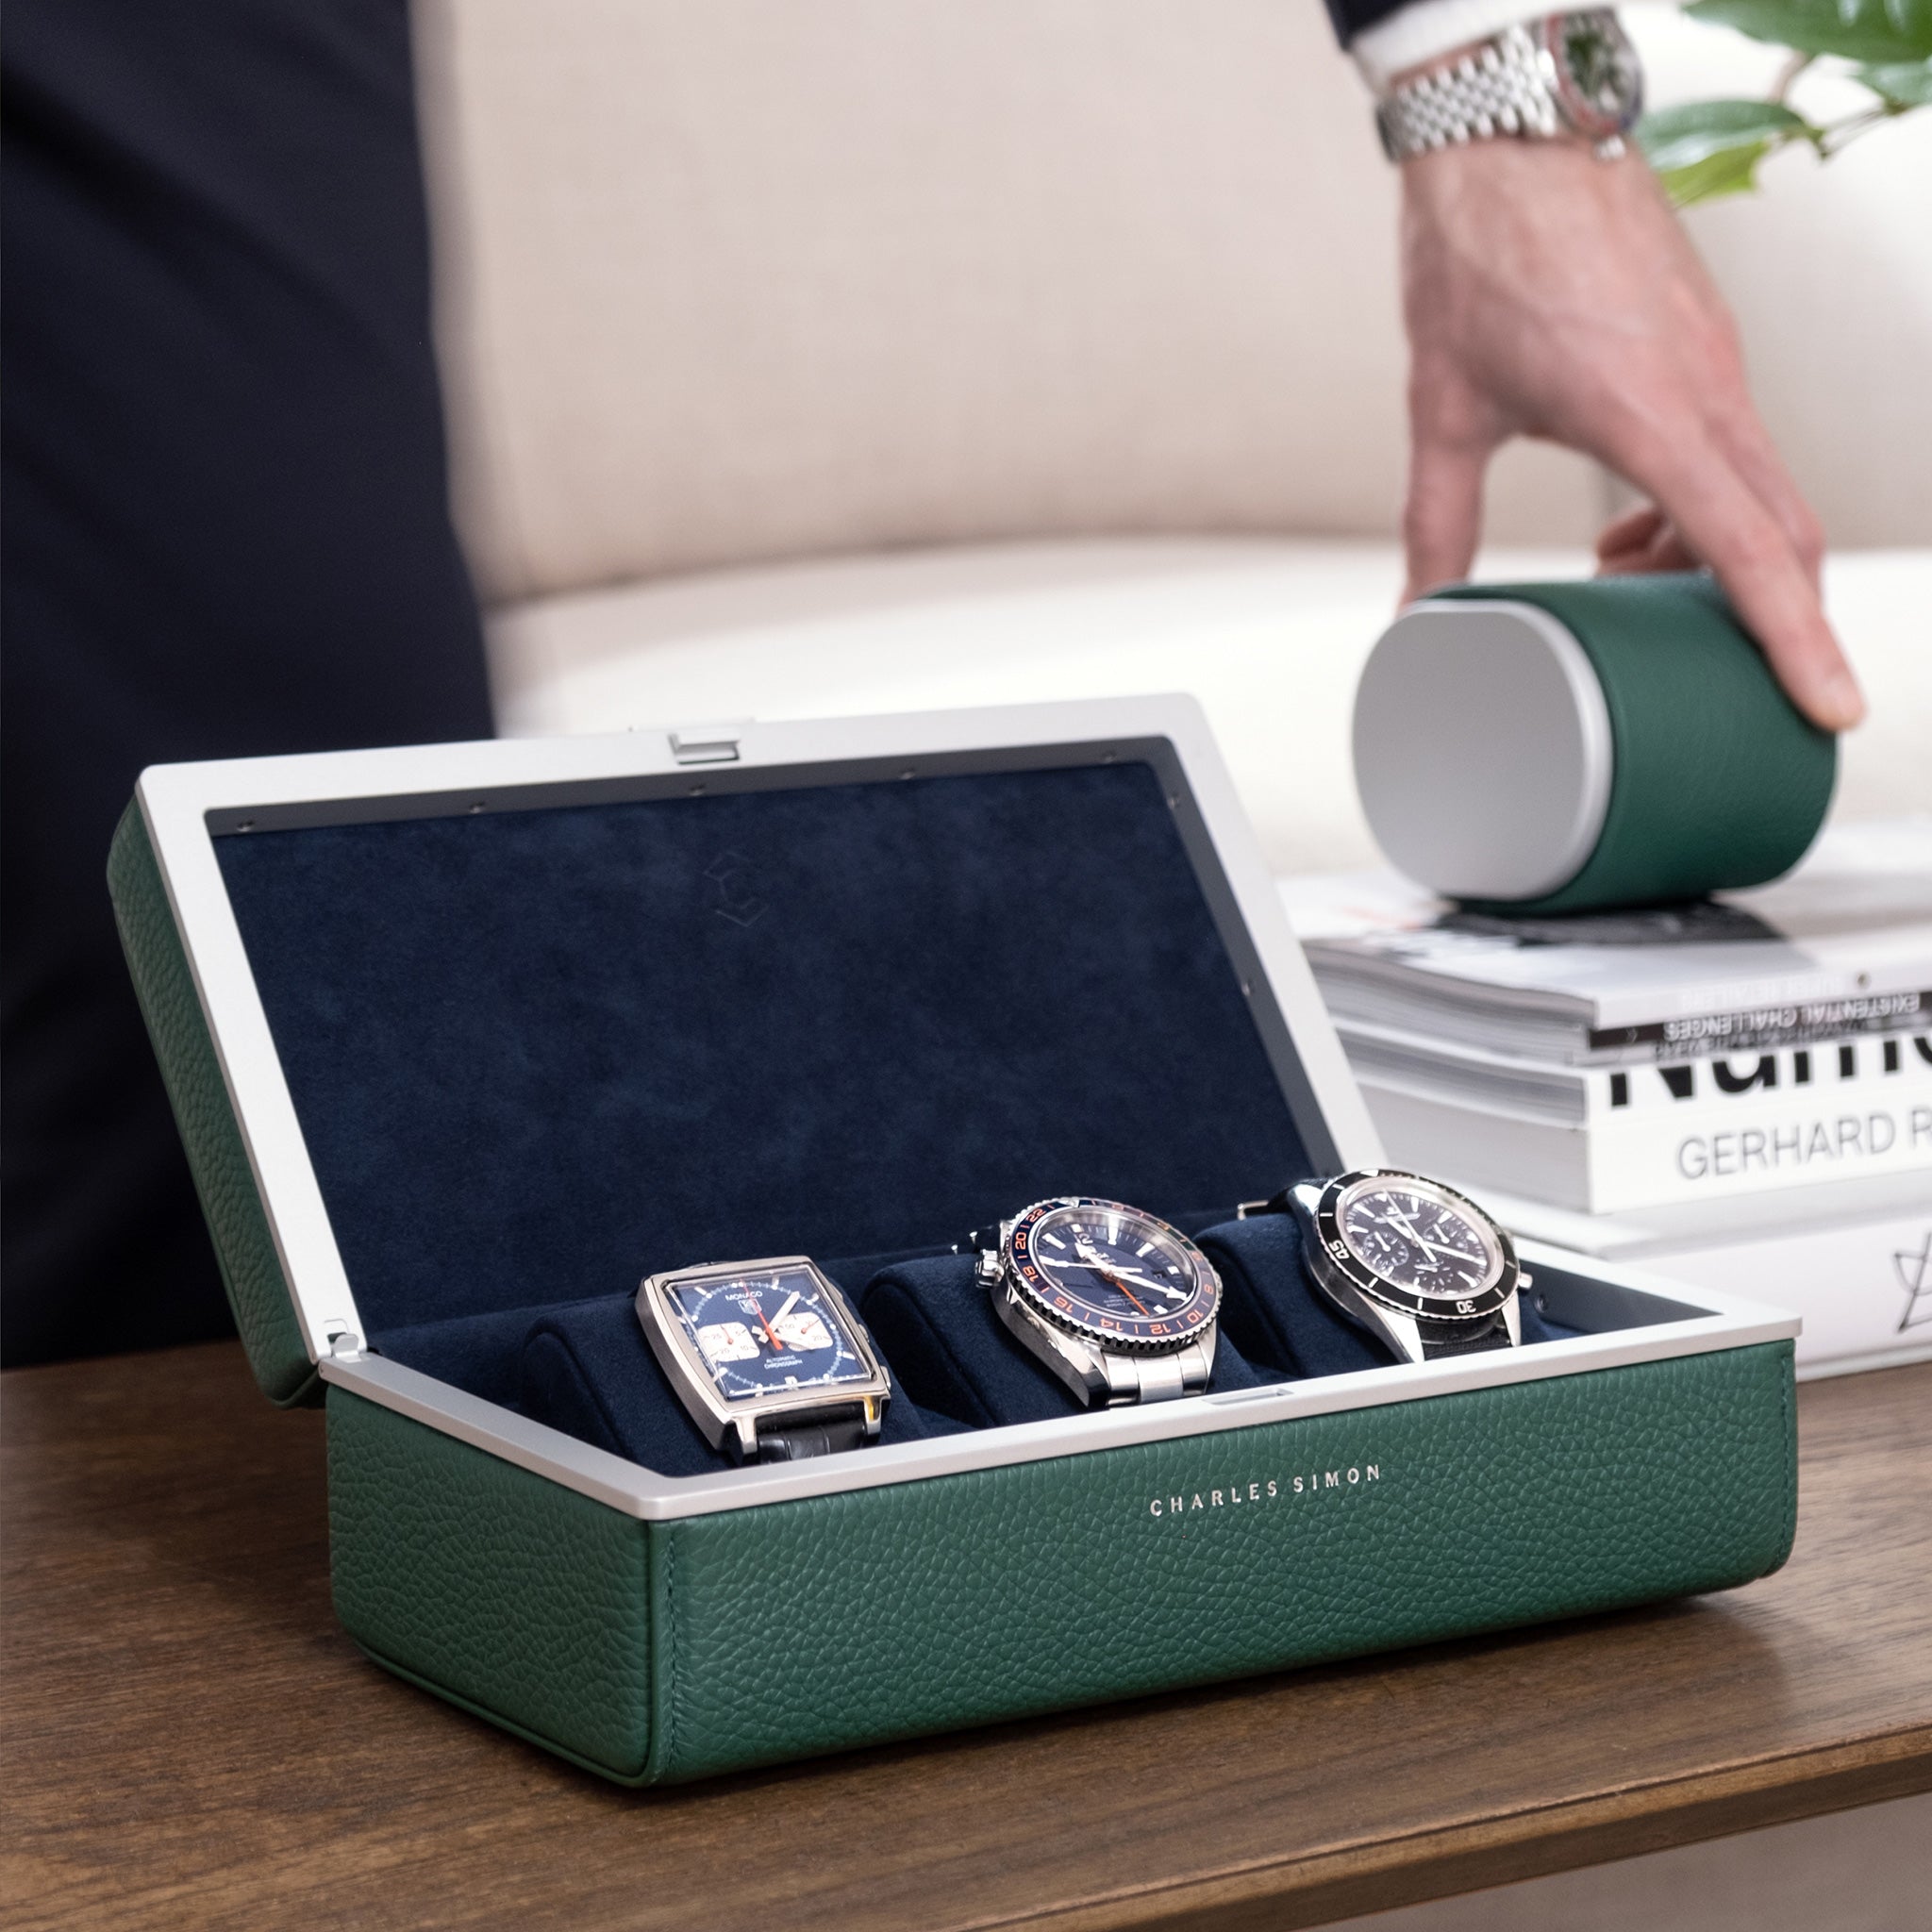 Lifestyle photo of open emerald Eaton 3 Watch case for a watch collection of up to 3 watches. Man is grabbing emerald Theo Watch roll in the background.